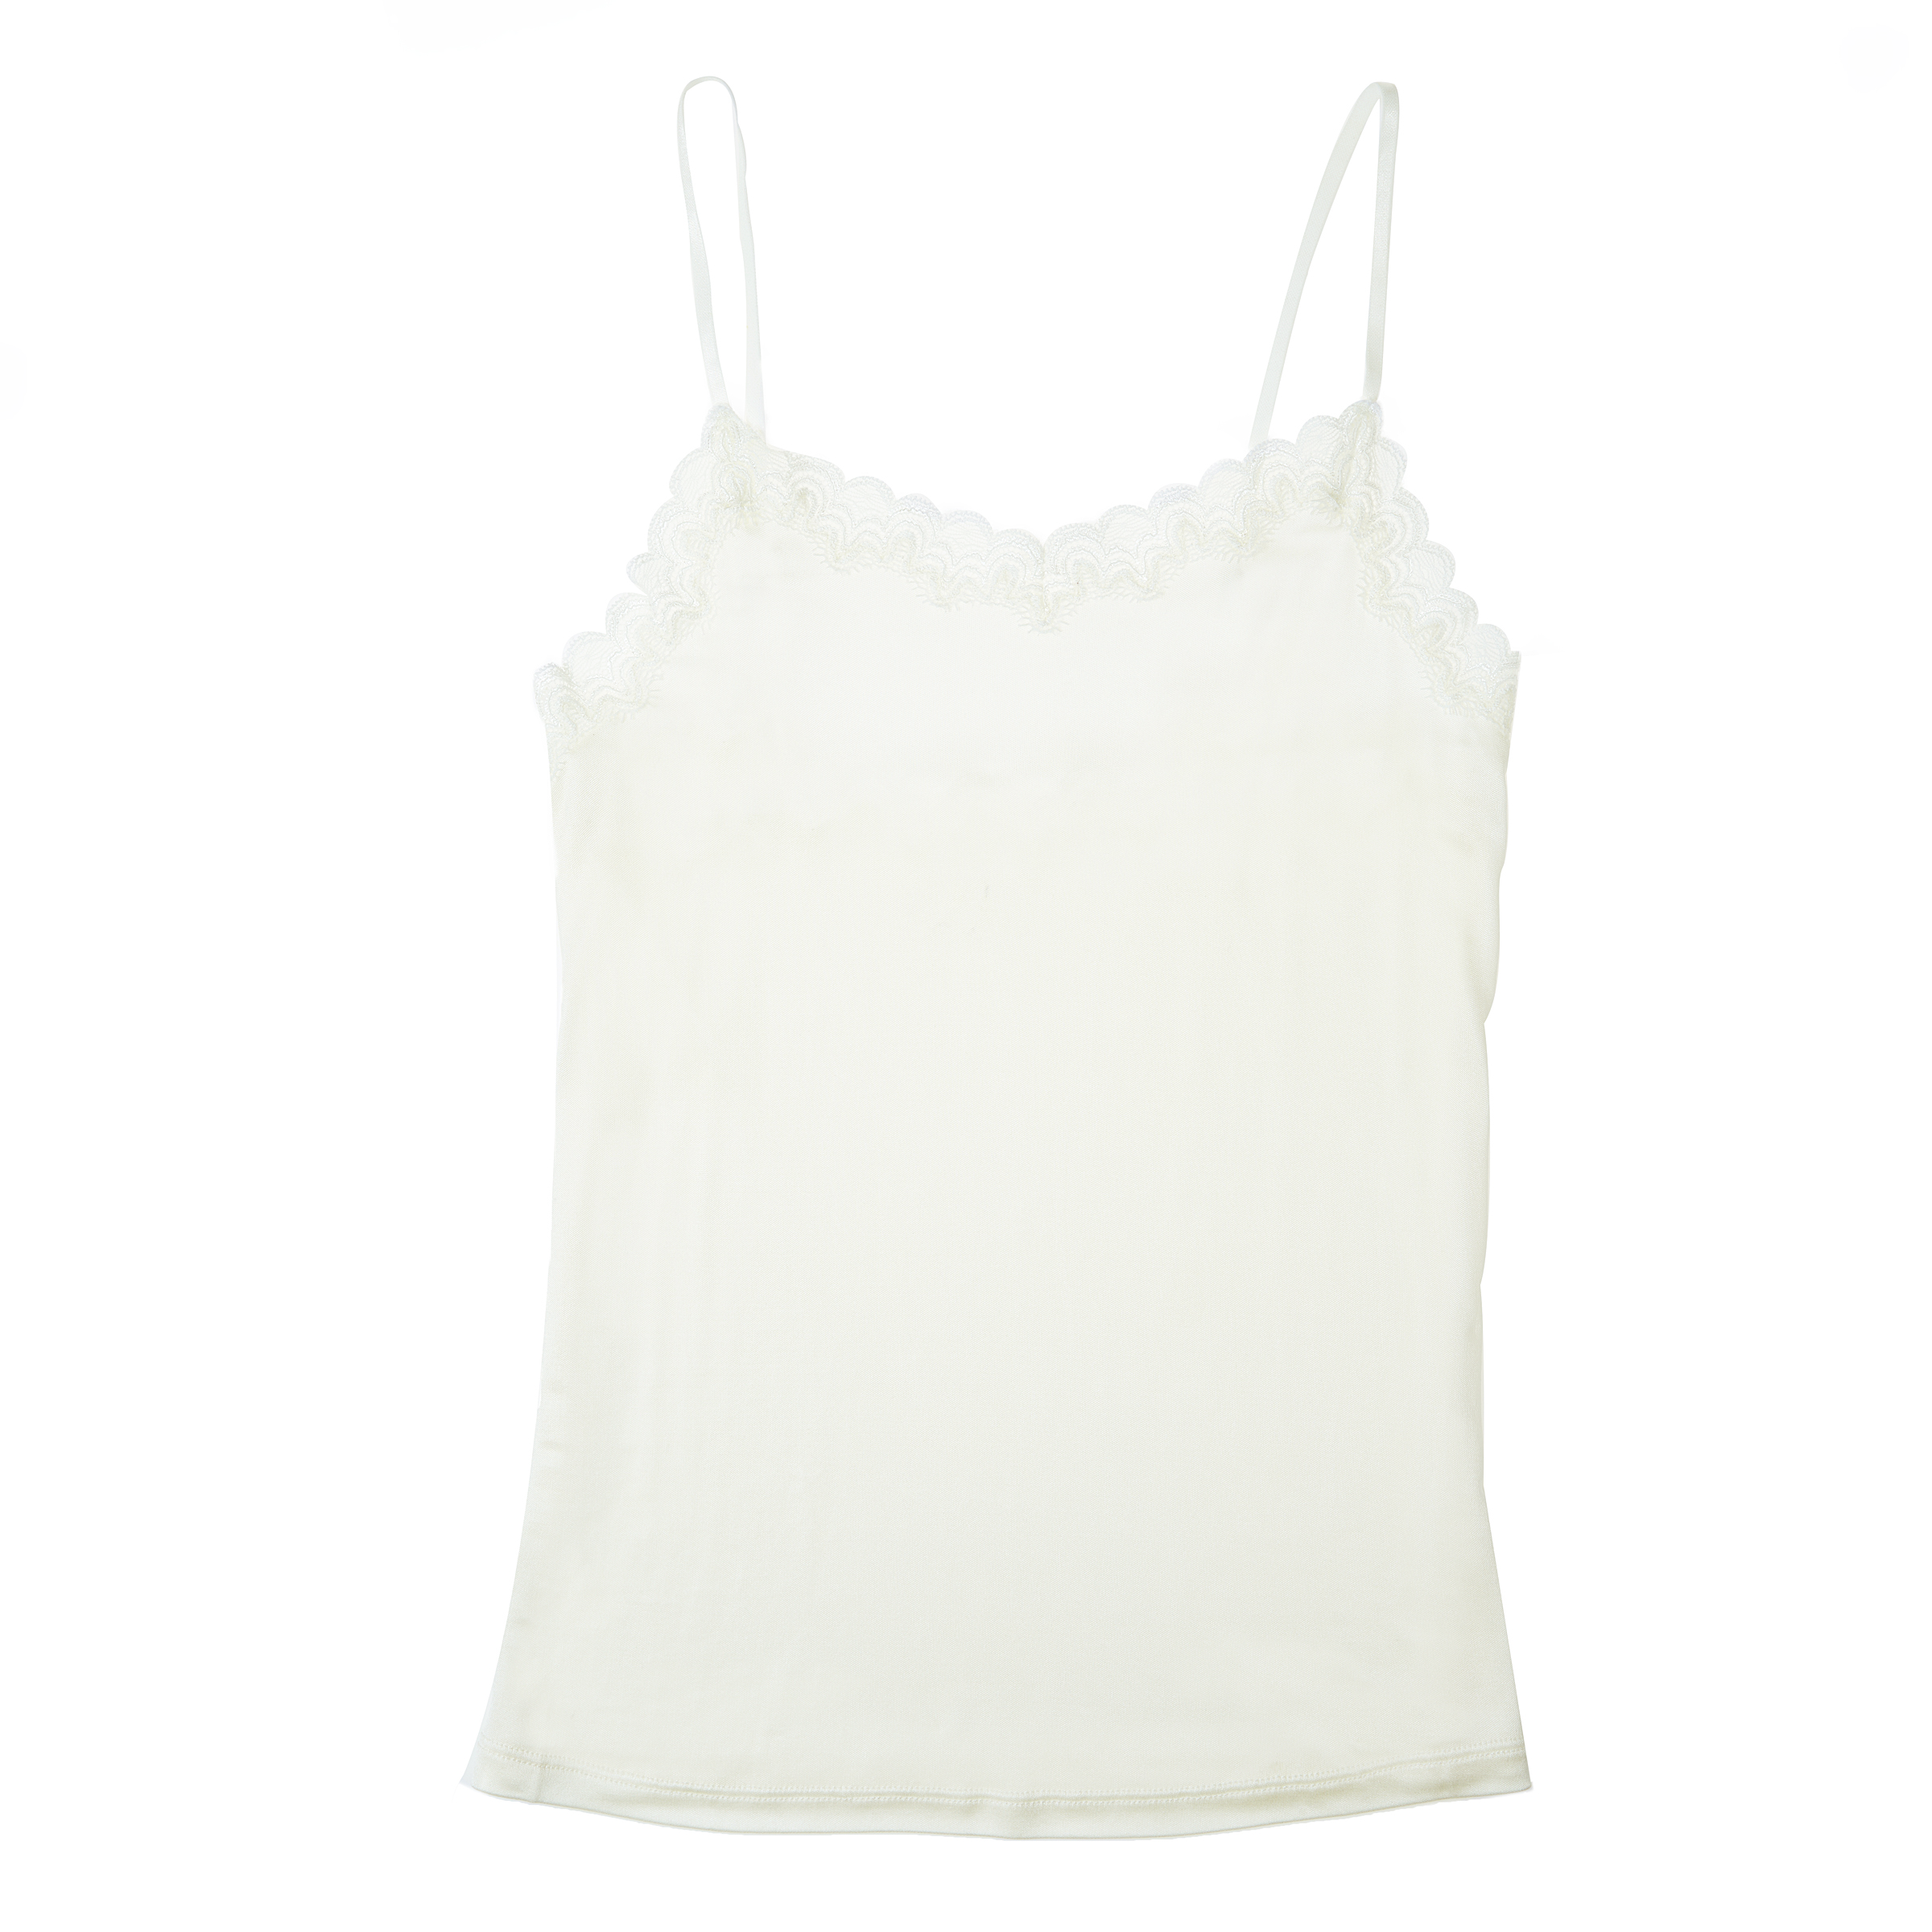 Lace Camisole Set With Cleavage Control And Quick Dry Foot Pad Pain For  Women From Dujuanflower, $20.61